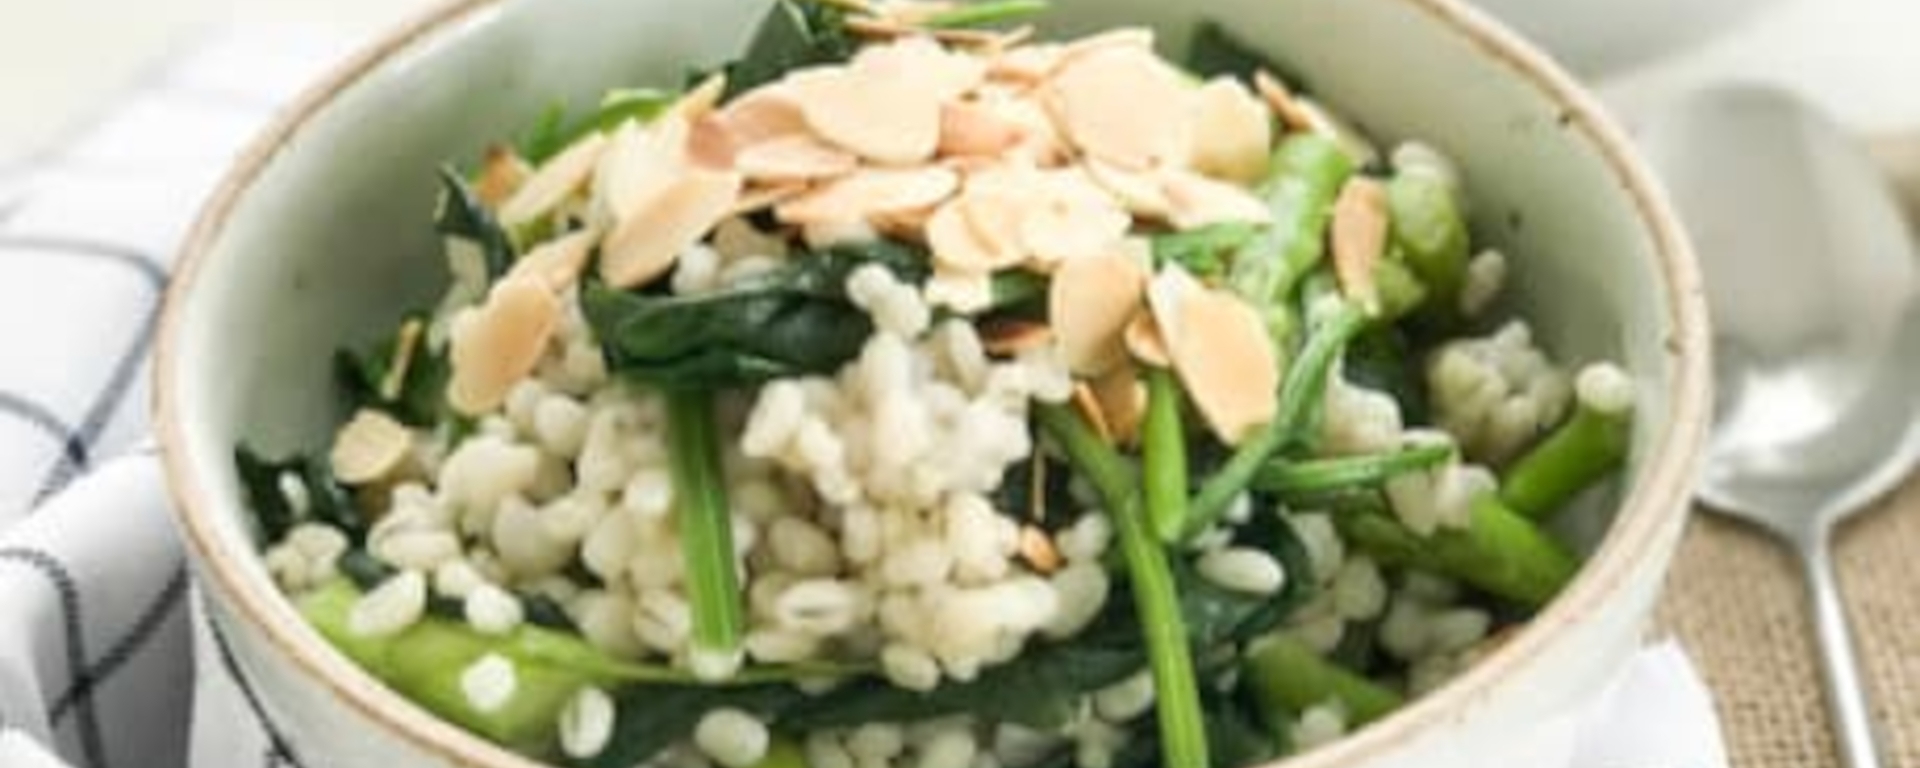 Barley with Green Asparagus and Spinach